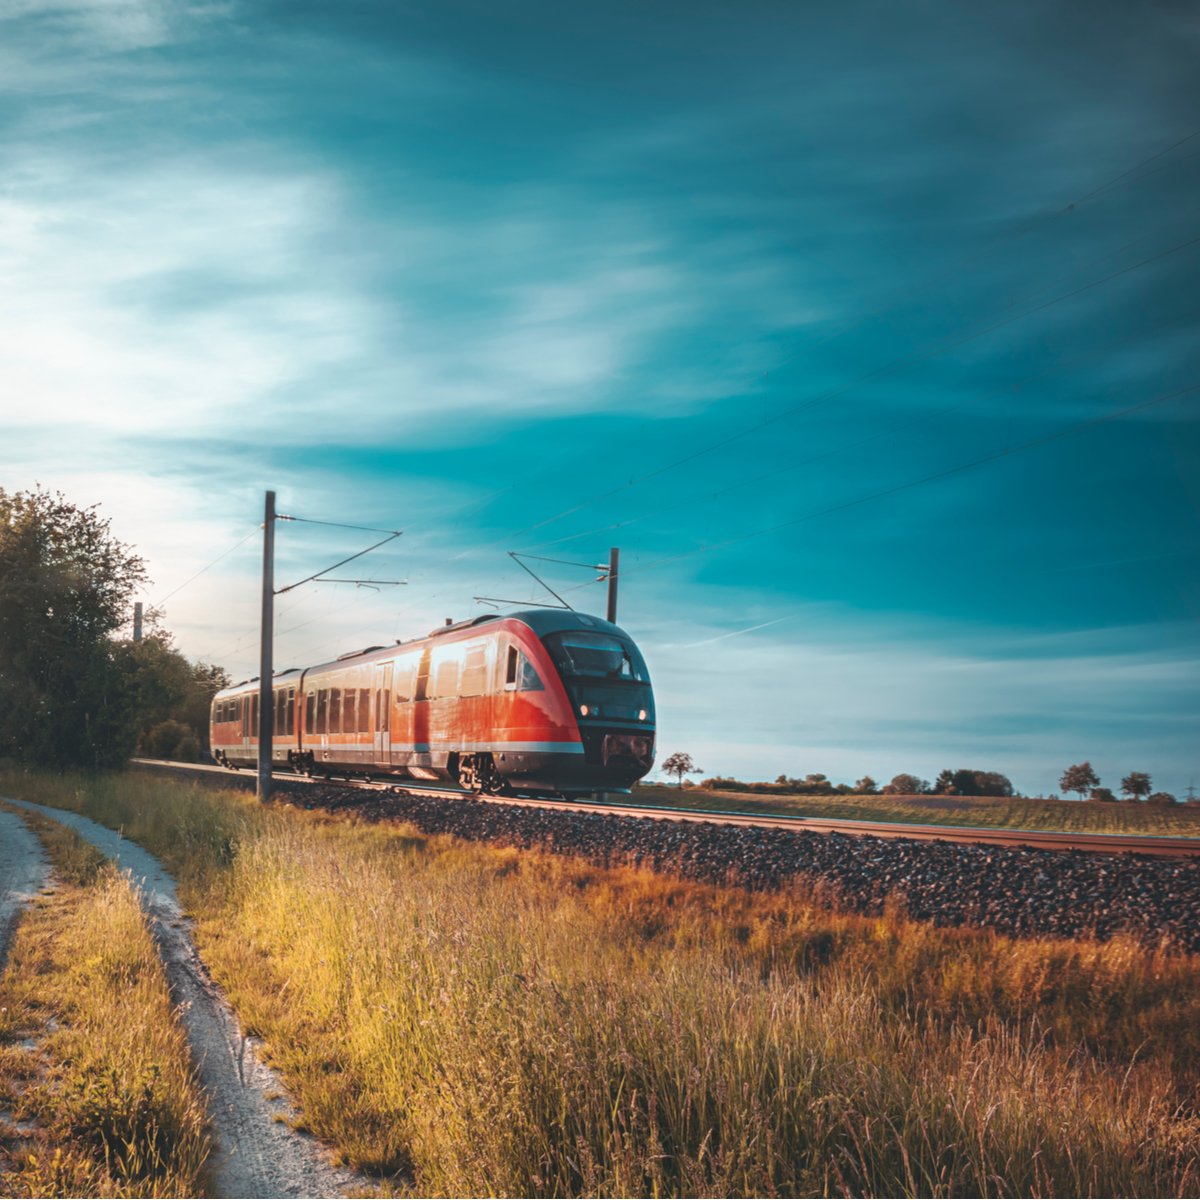 Top Ten Tips to Know Before Booking Tickets and Taking the Train with Rail  Europe